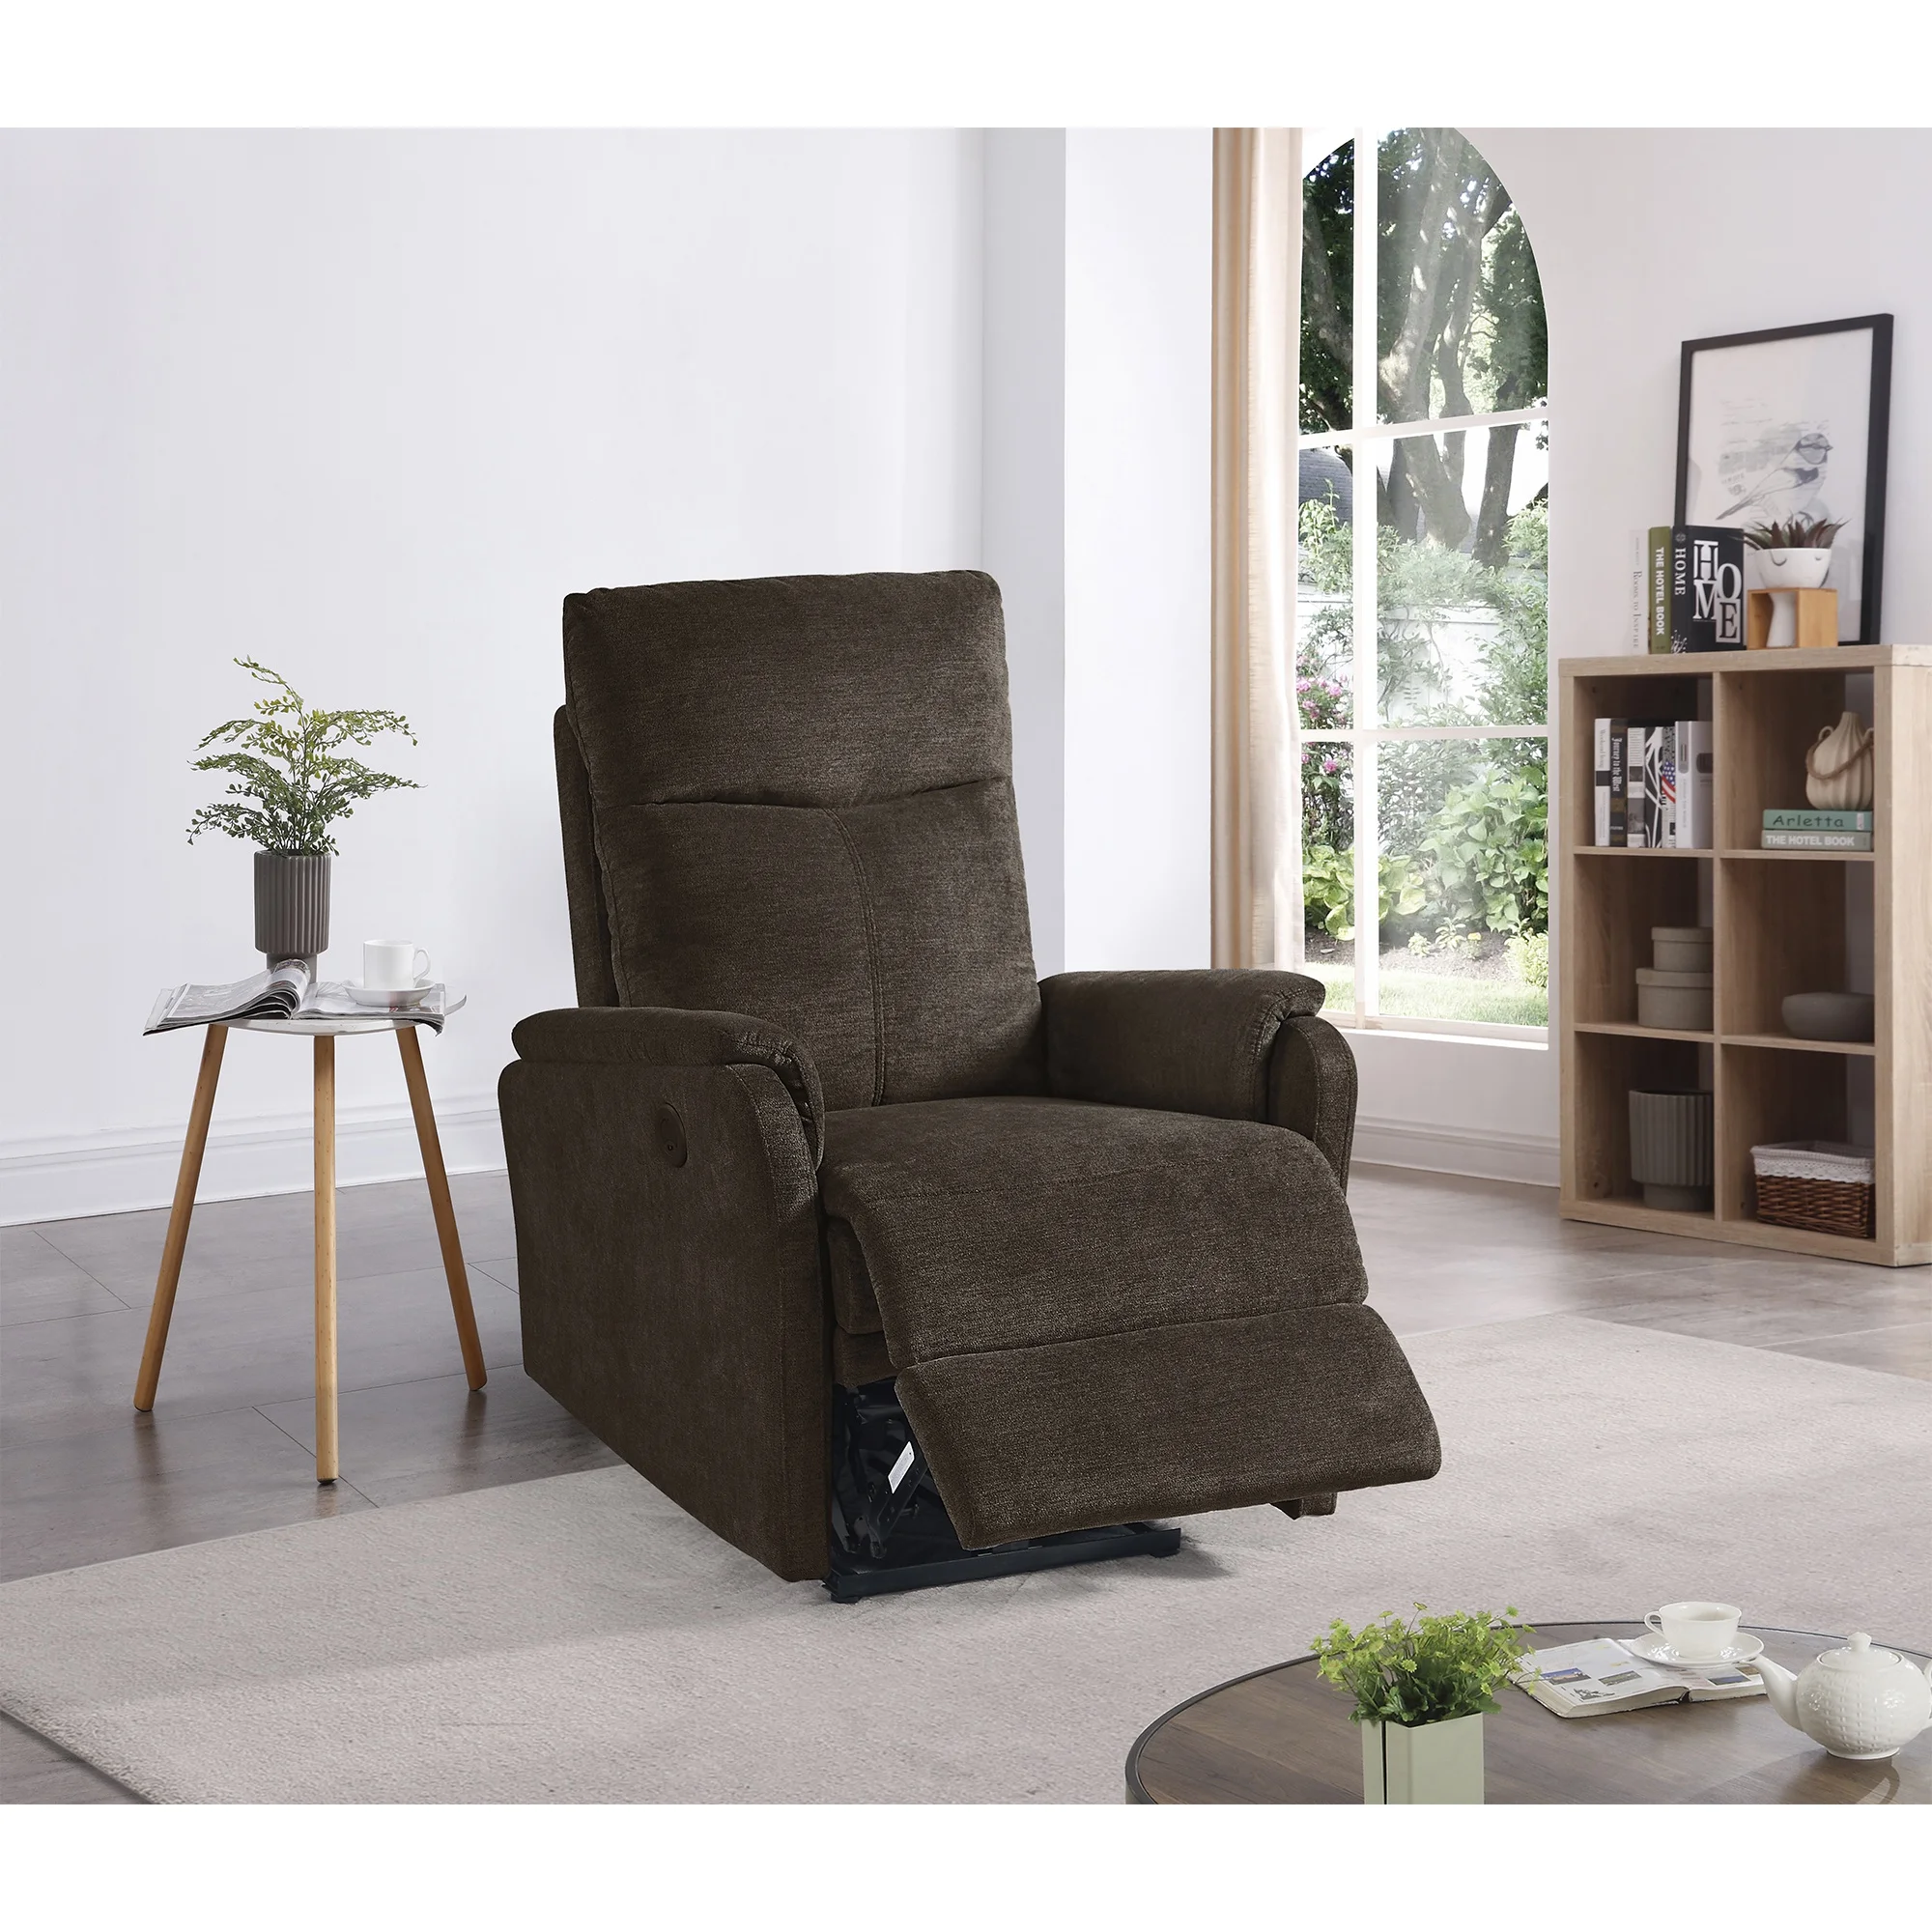 

Hot selling For 10 Years Recliner Chair With Power function easy control big stocks Recliner Single Chair